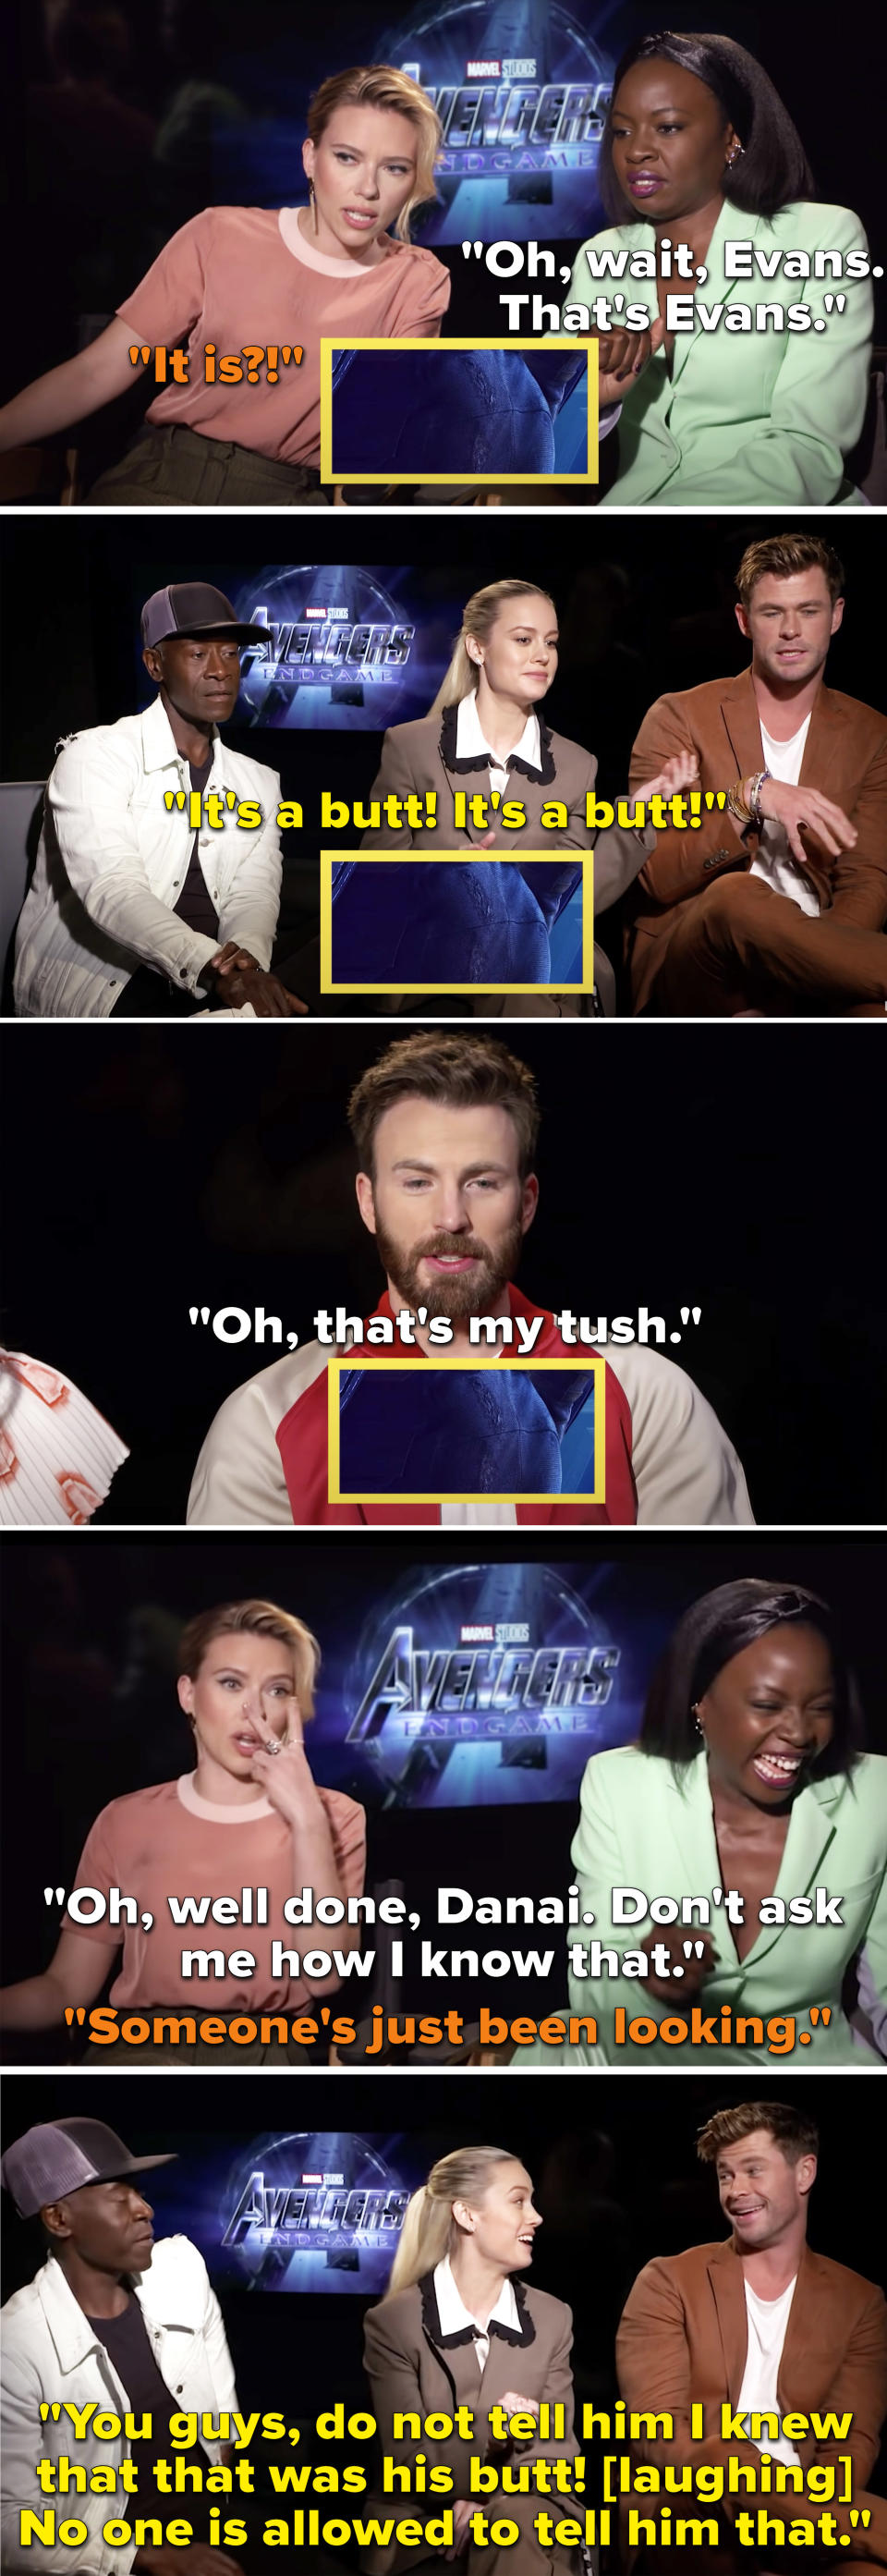 Danai Gurira and Brie Larson knowing it's Chris Evans' butt right away and laughing about it